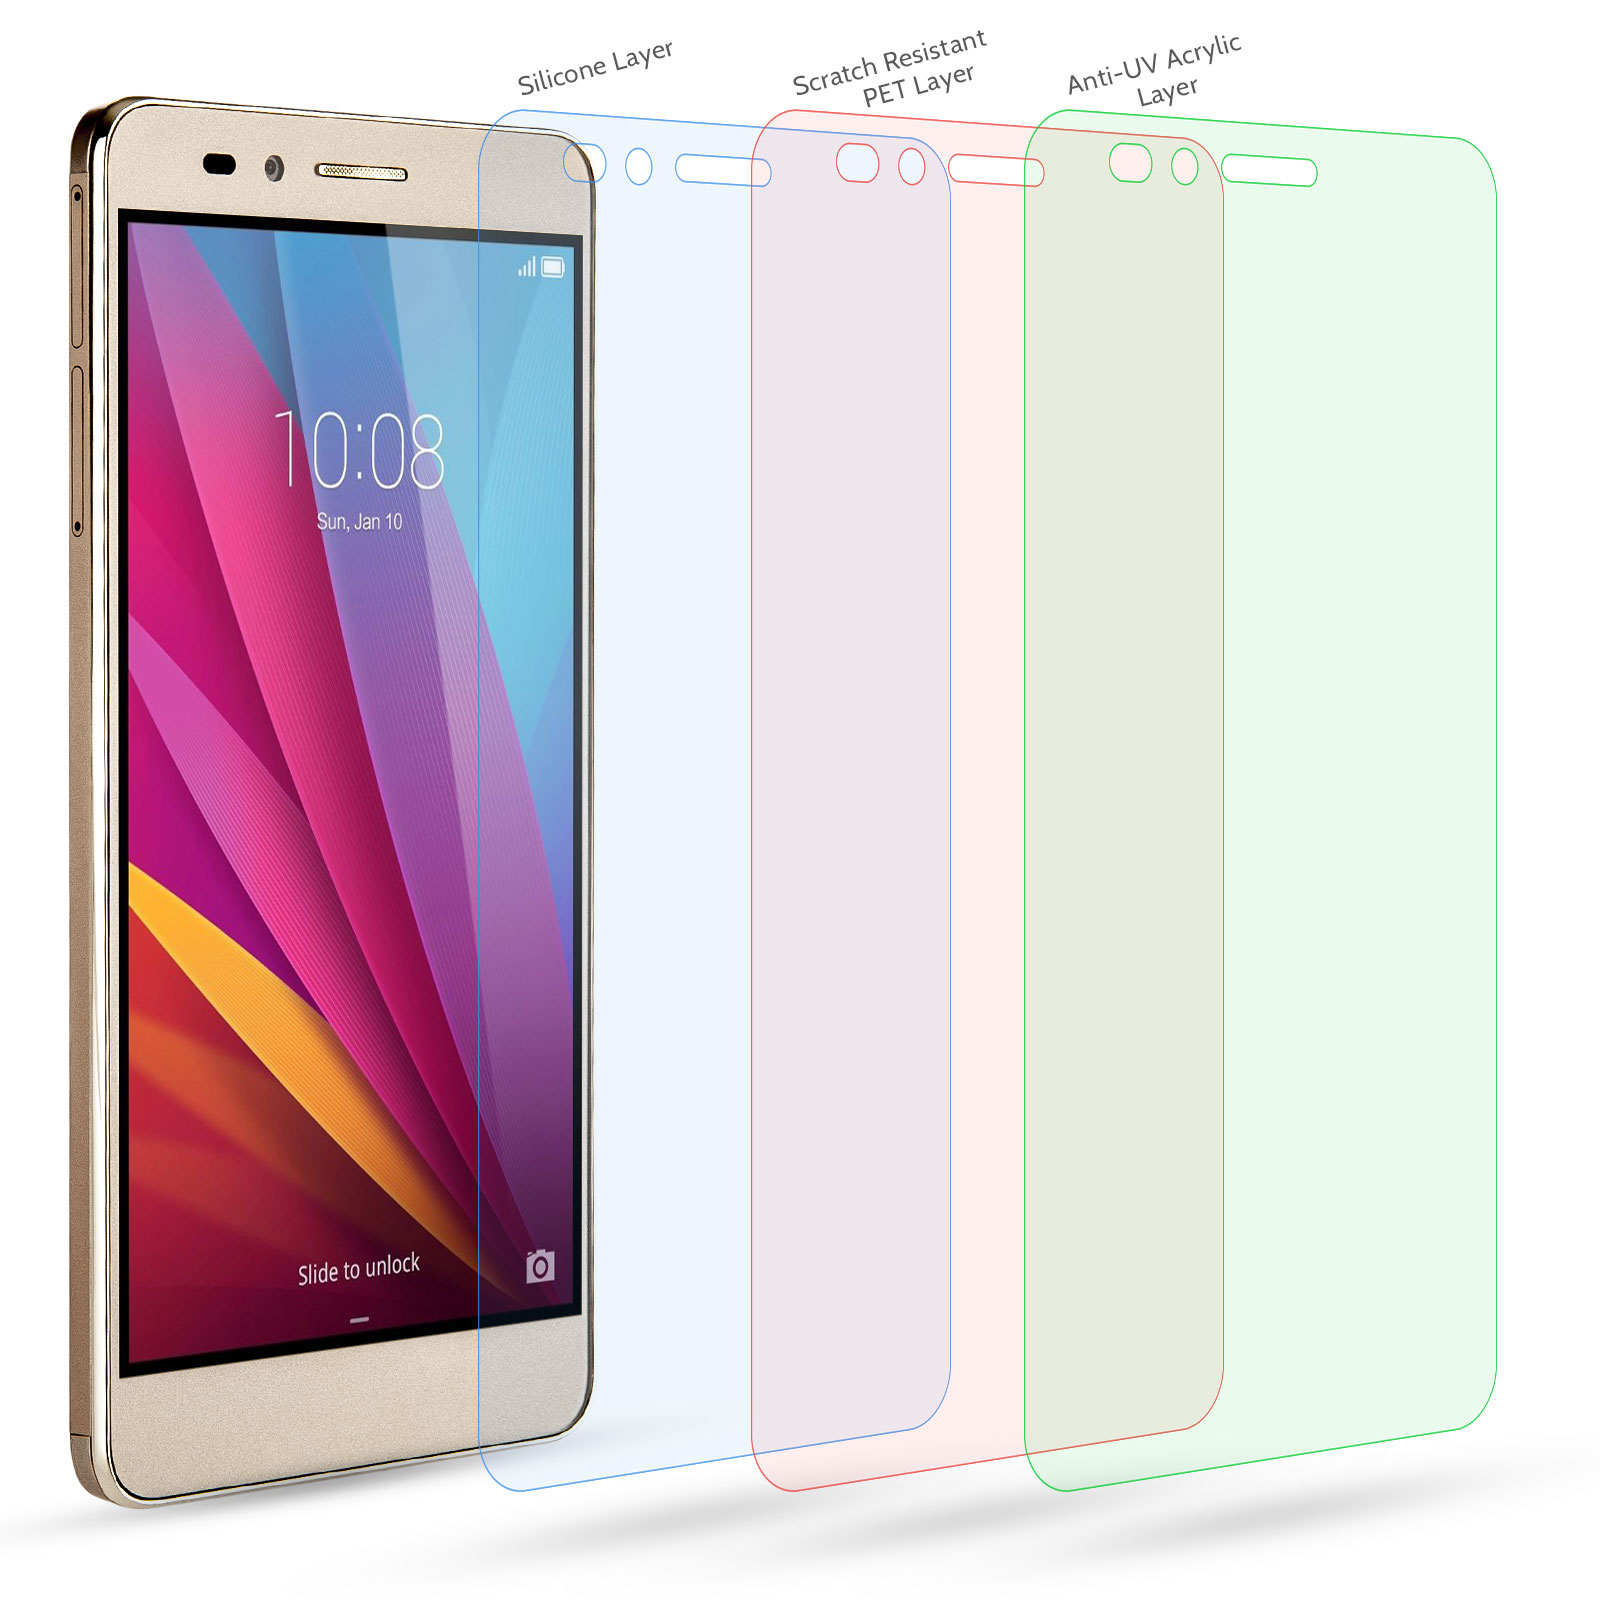 Yousave Accessories Huawei Honor 5X Screen Protectors x5